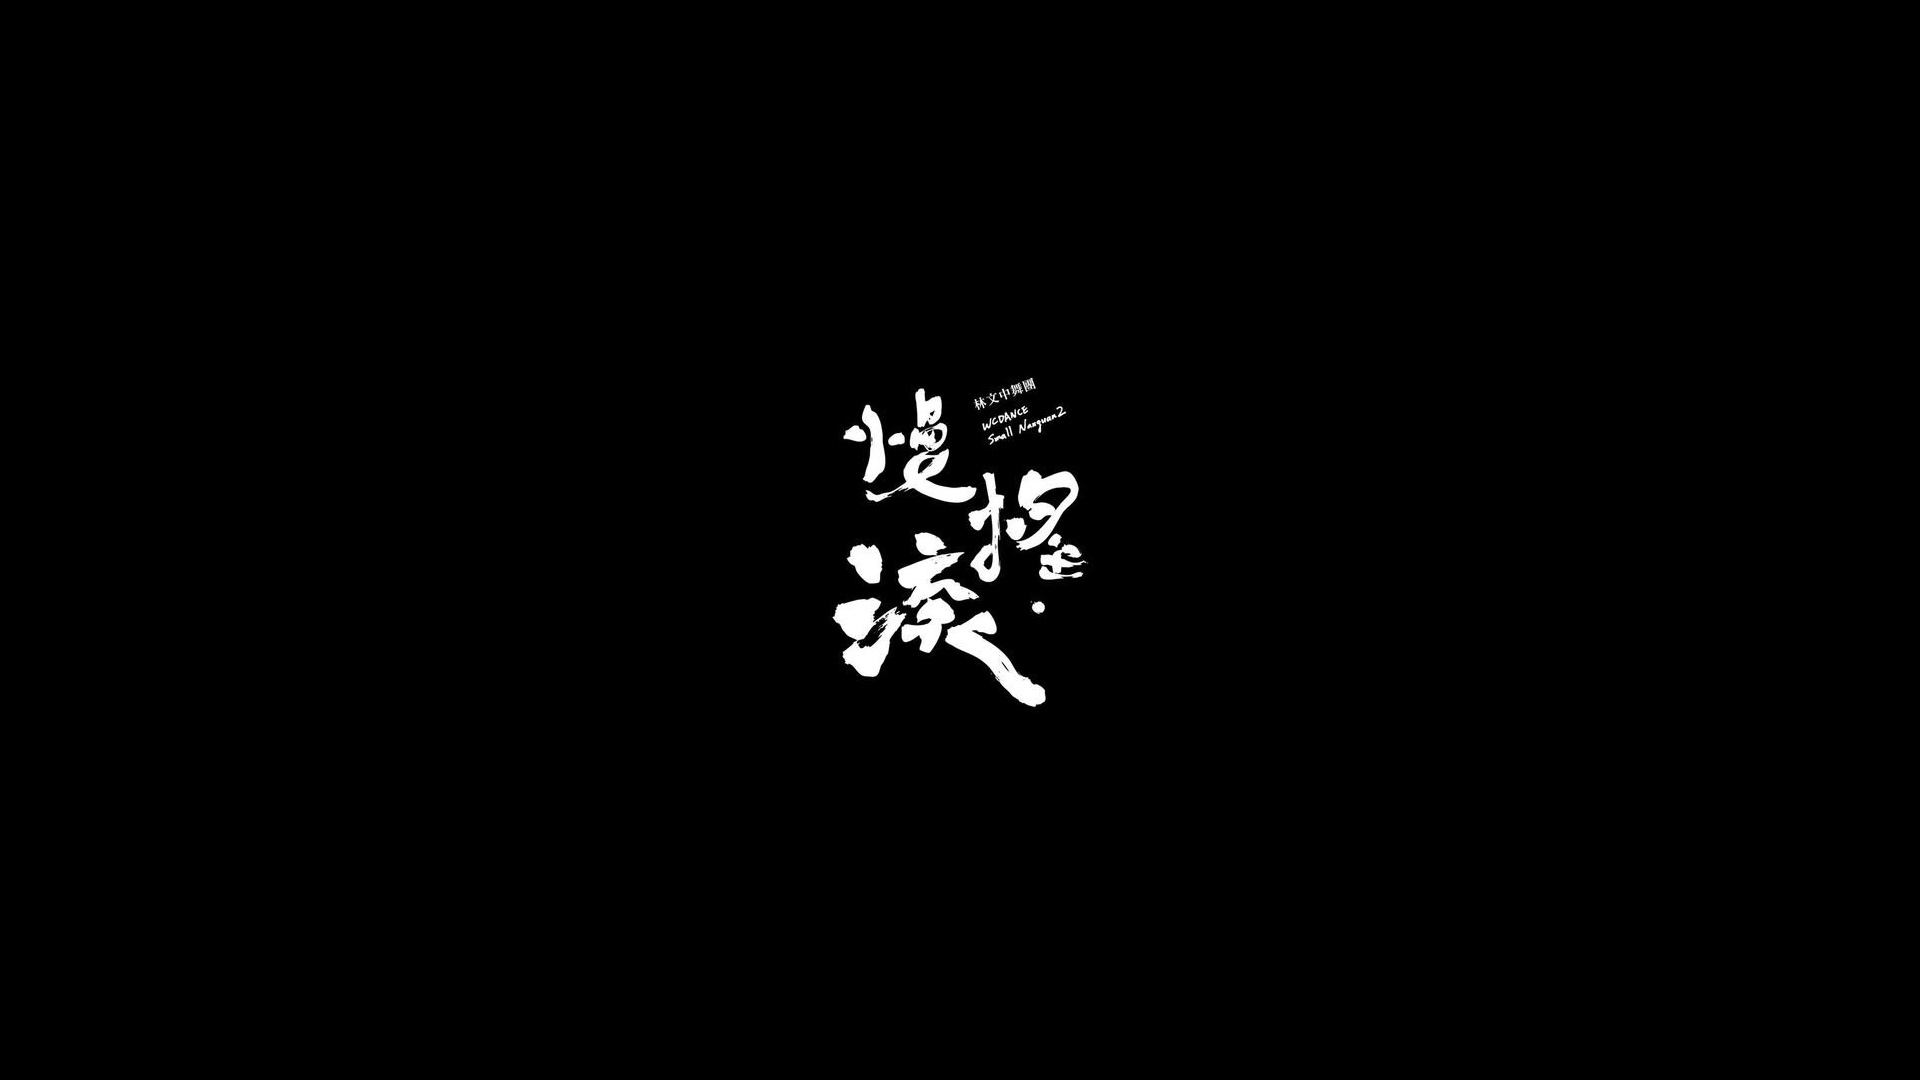 Japanese Black and White Wallpaper Free Japanese Black and White Background